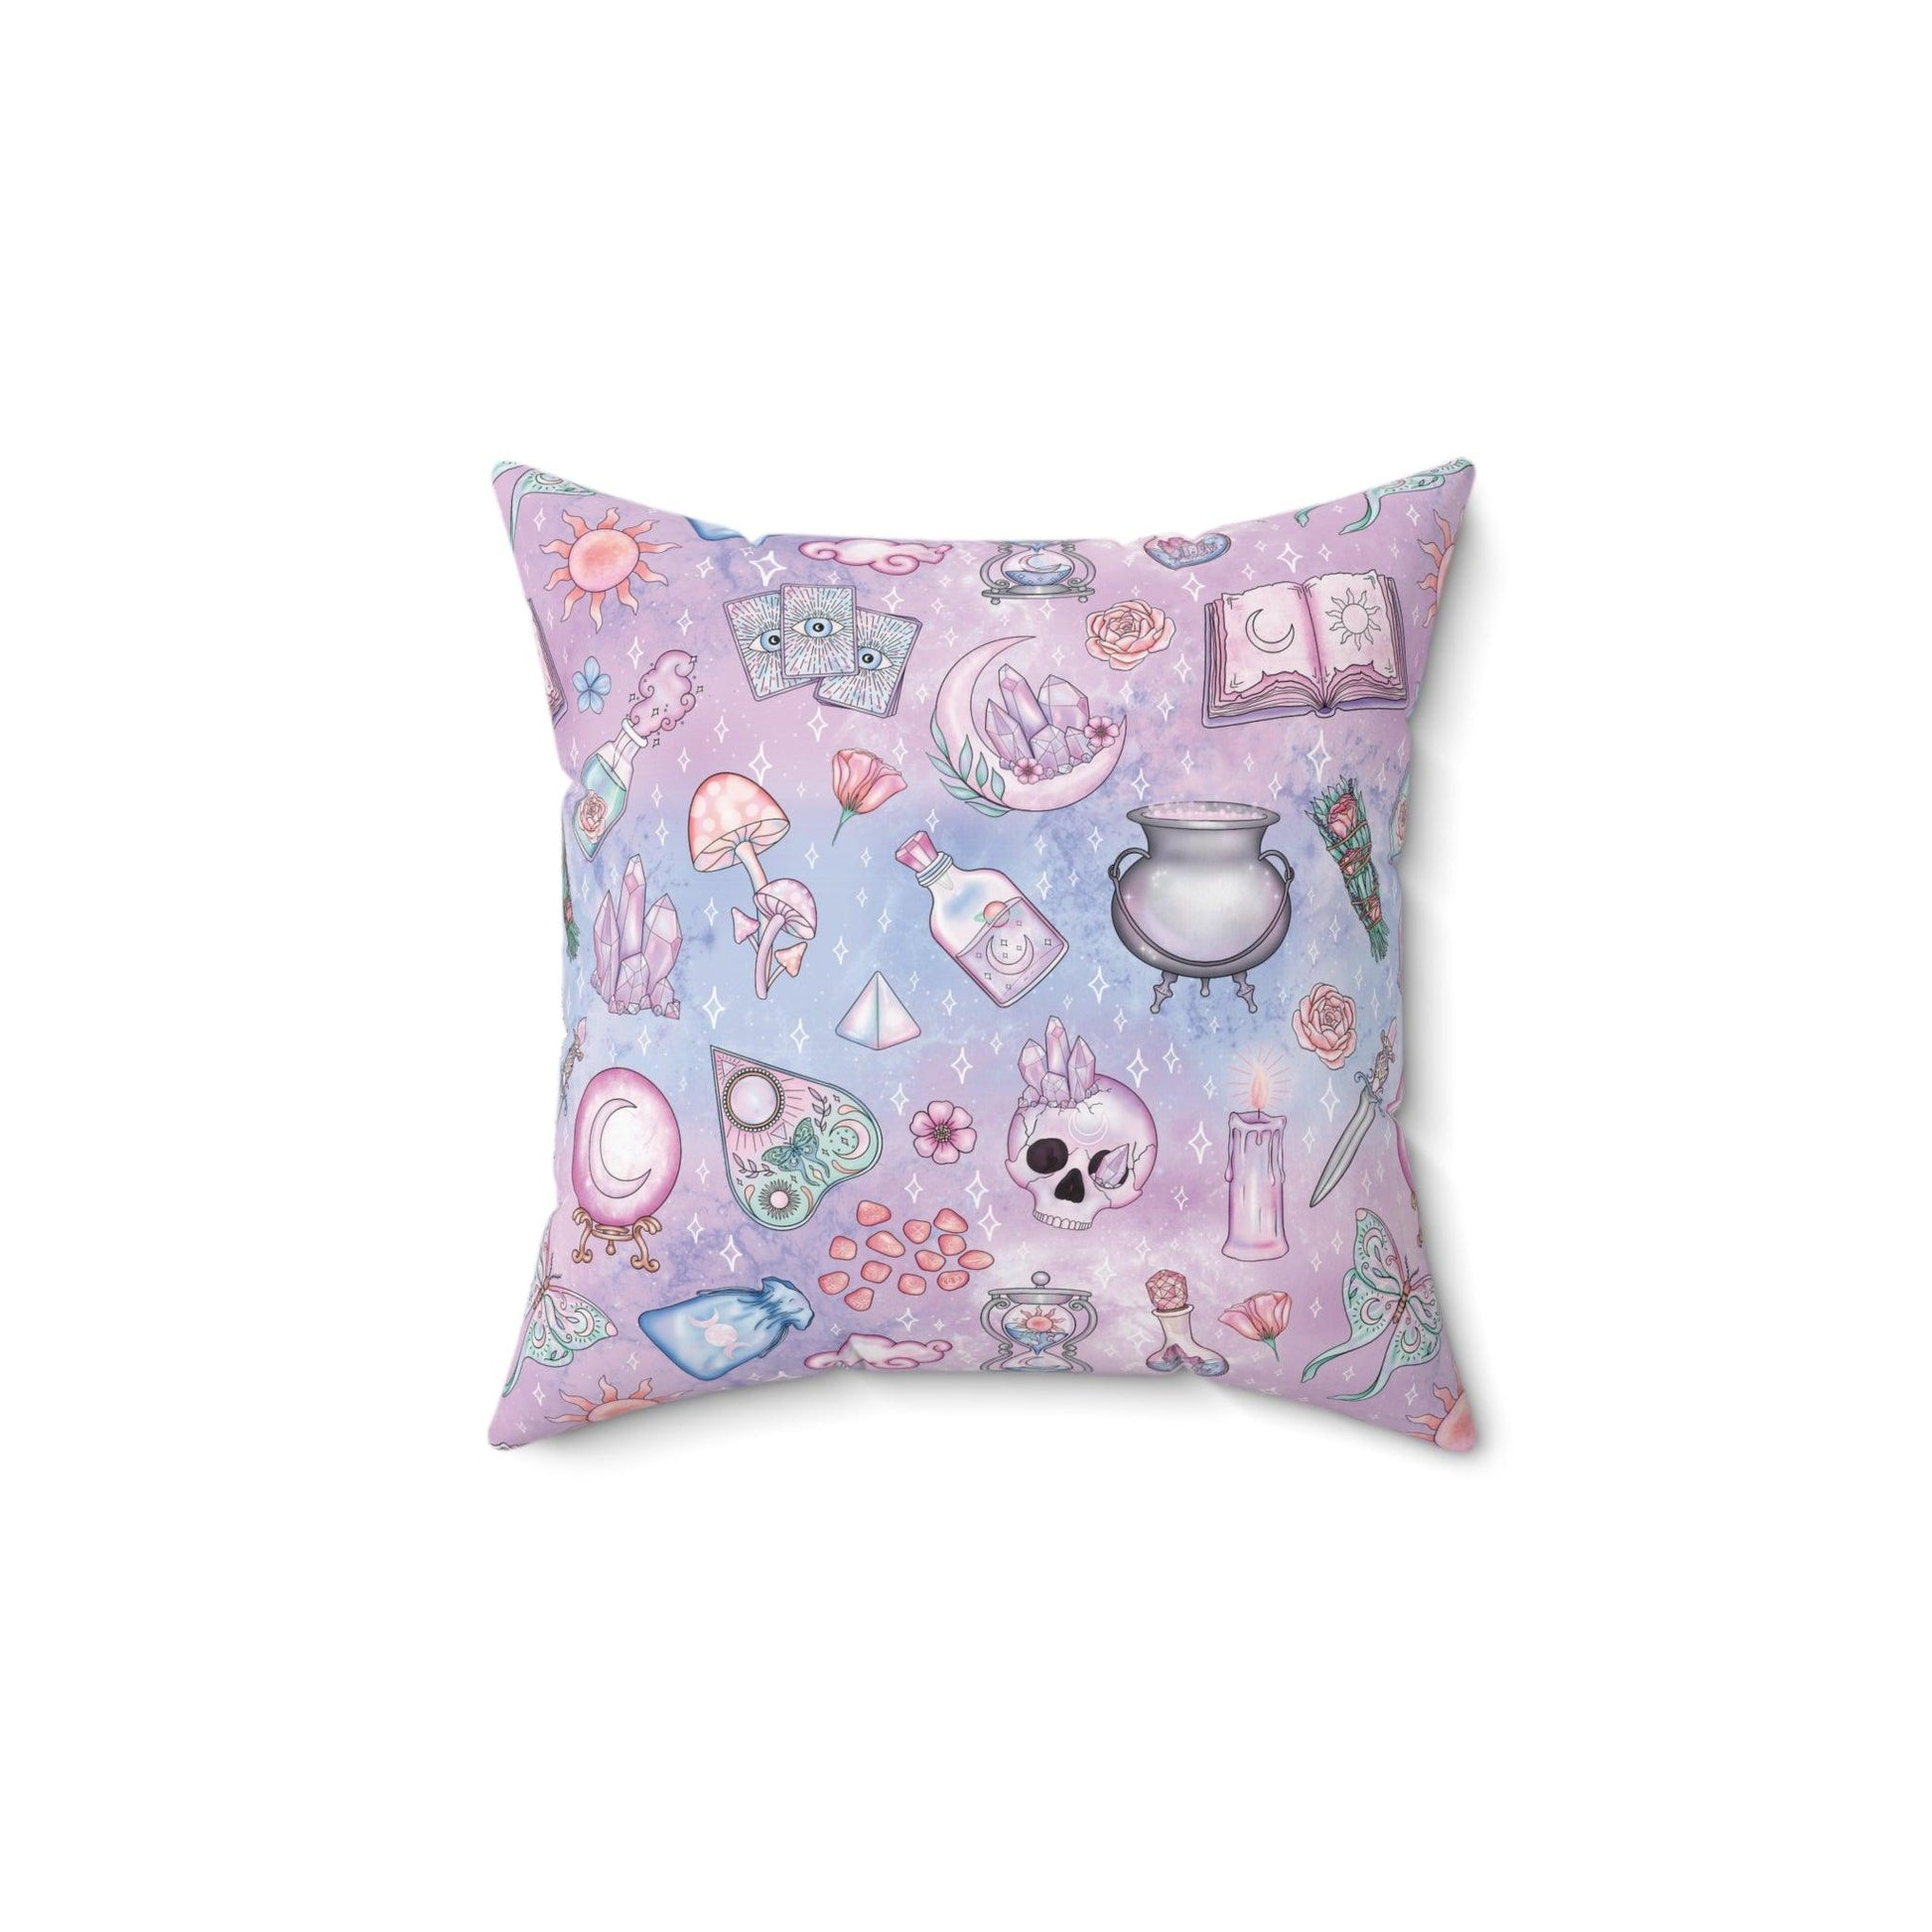 Kawaii Pastel Goth Witchy Whimsigoth Blue & Pink Accent Pillow | lovevisionkarma.com